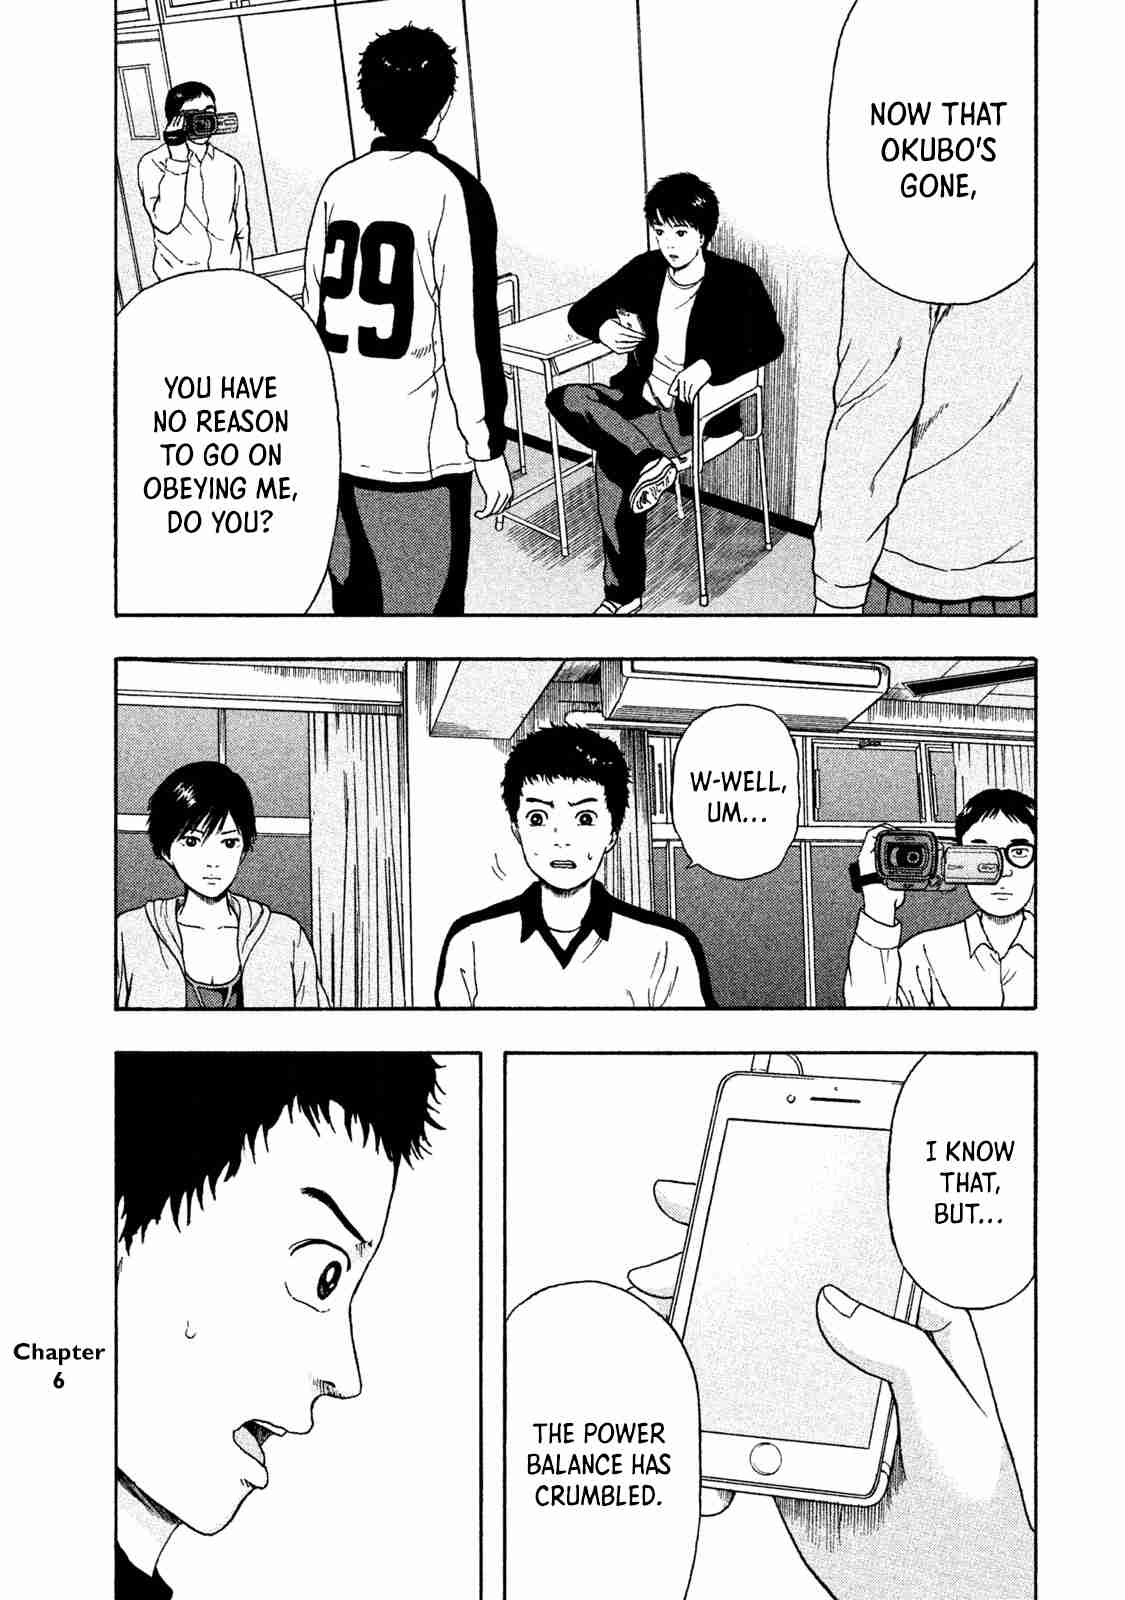 It's Time to Go to His Stomach, OK? Vol. 1 Ch. 6